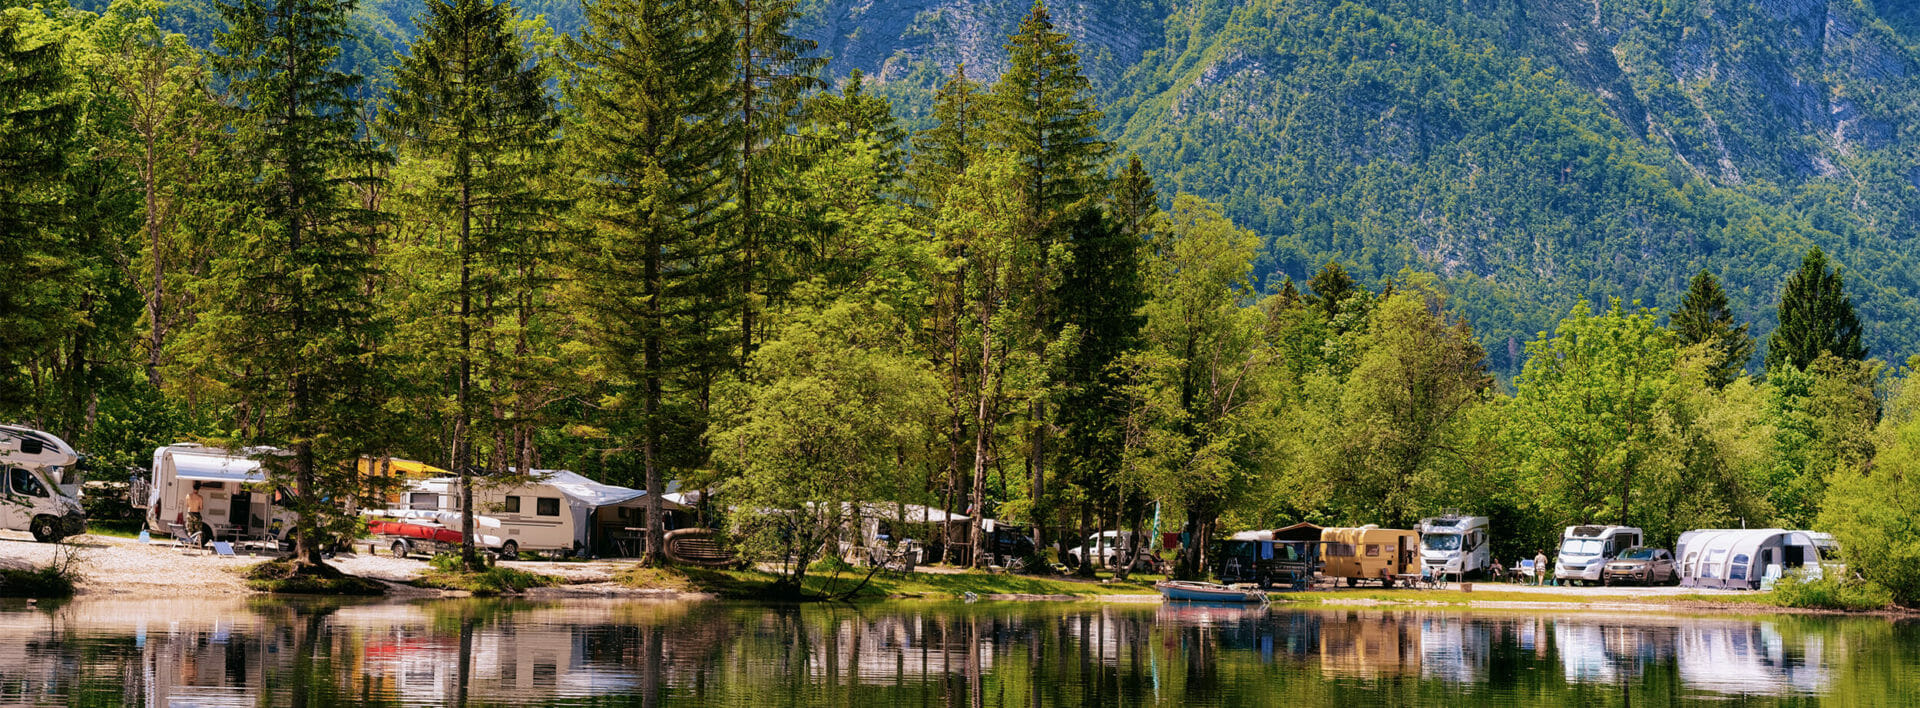 Best RV Campgrounds & Parks